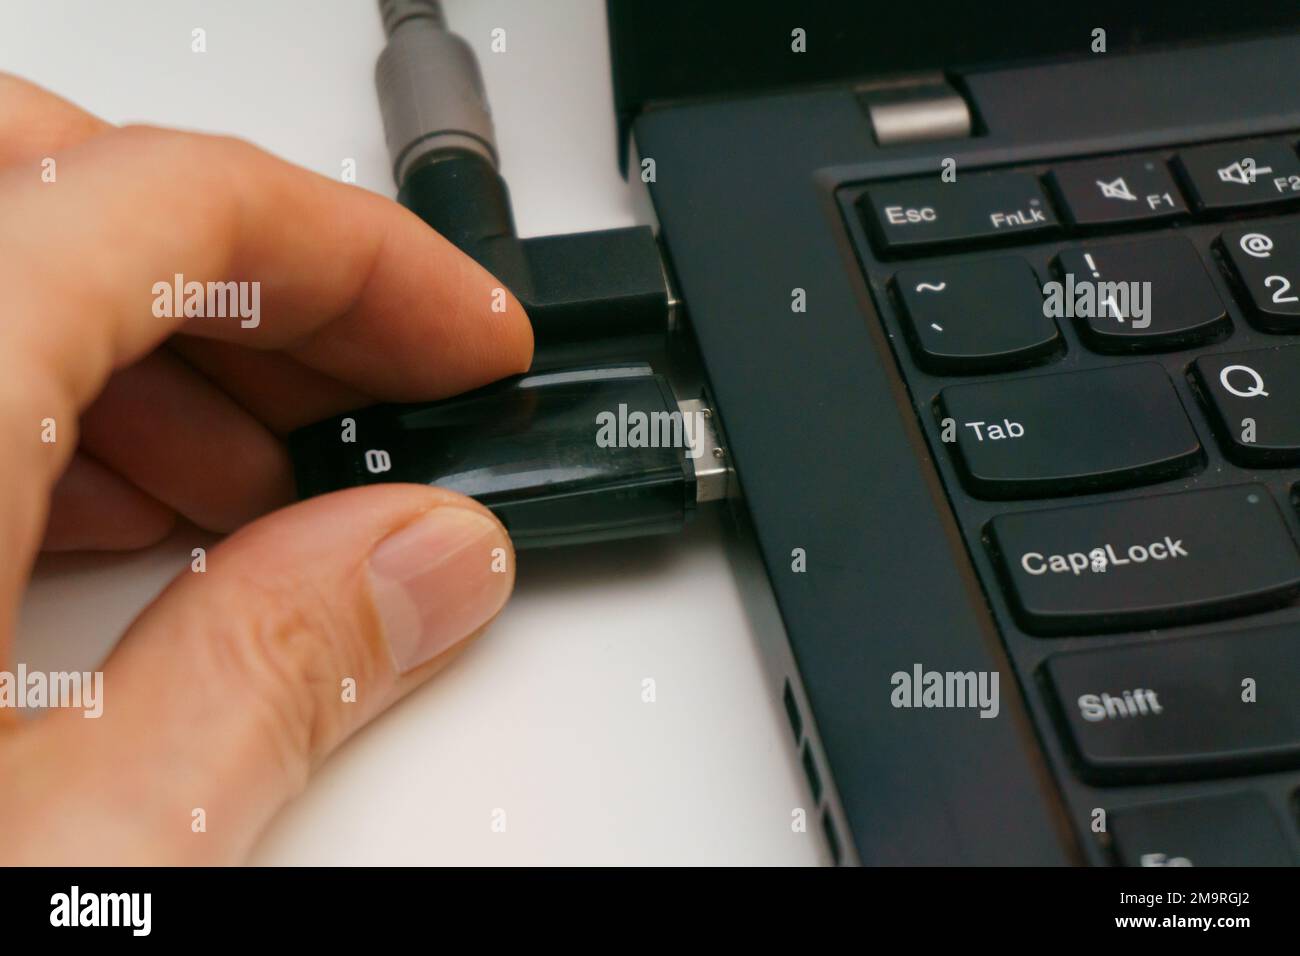 person plug in usb drive into laptop port Stock Photo